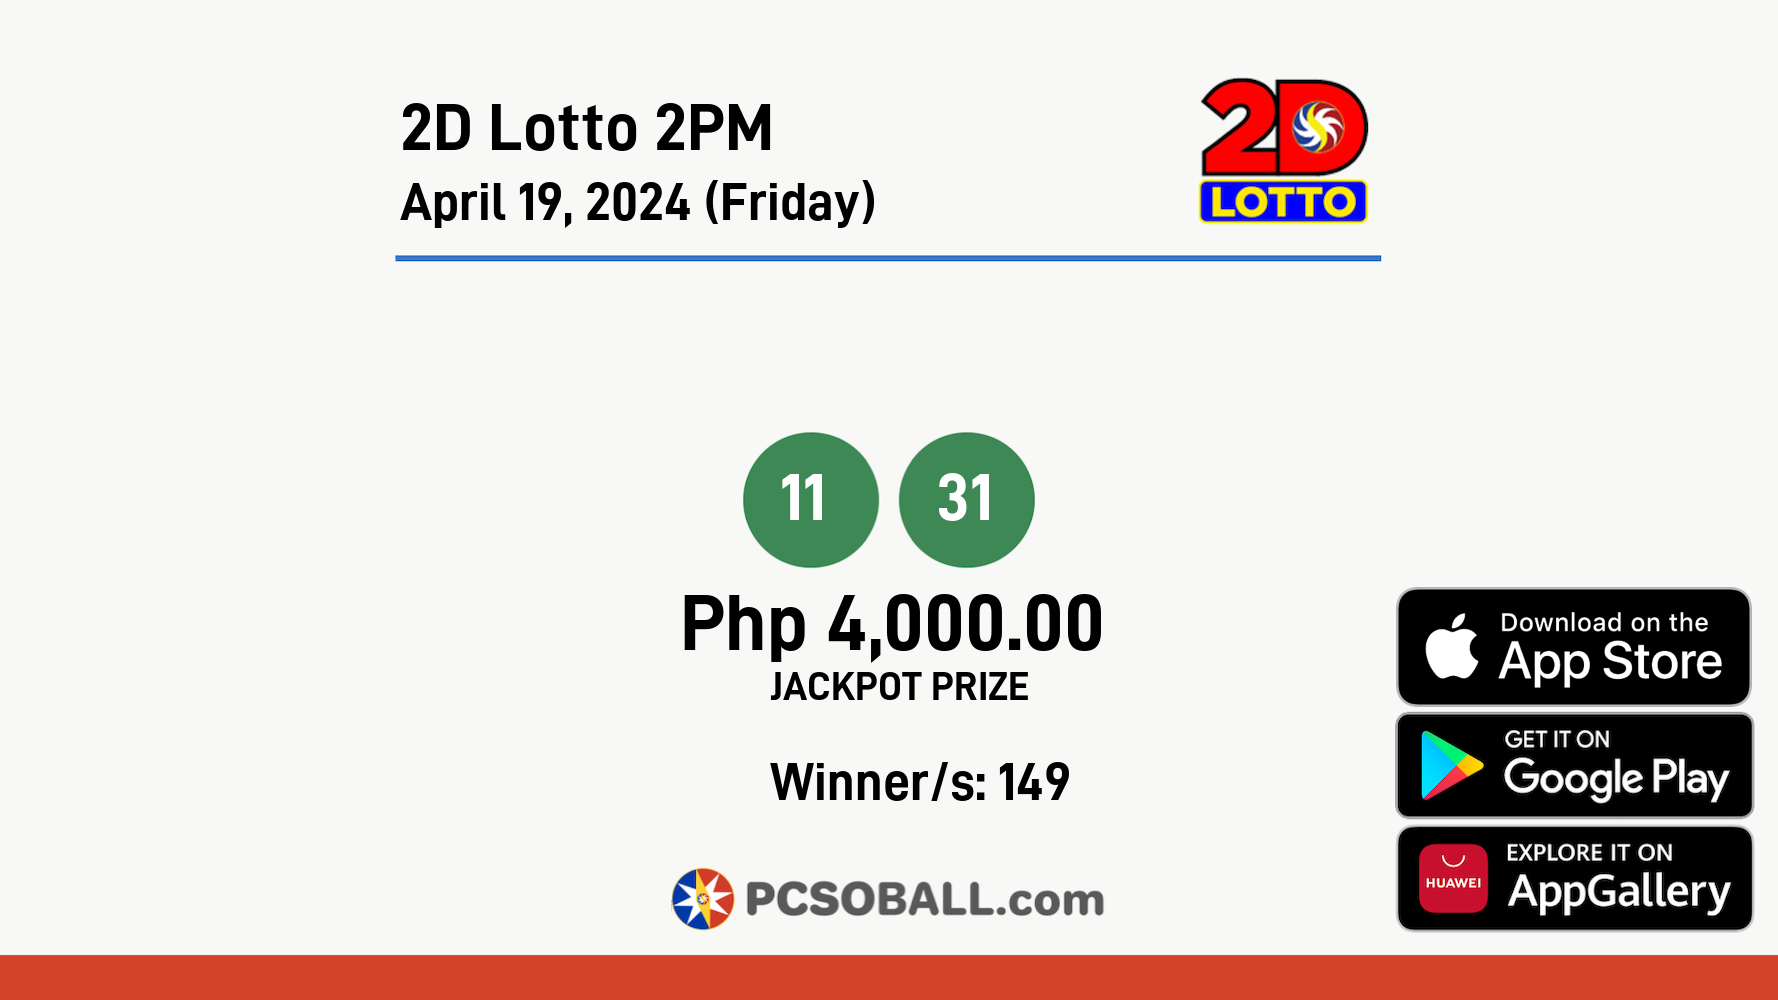 2D Lotto 2PM April 19, 2024 (Friday) Result